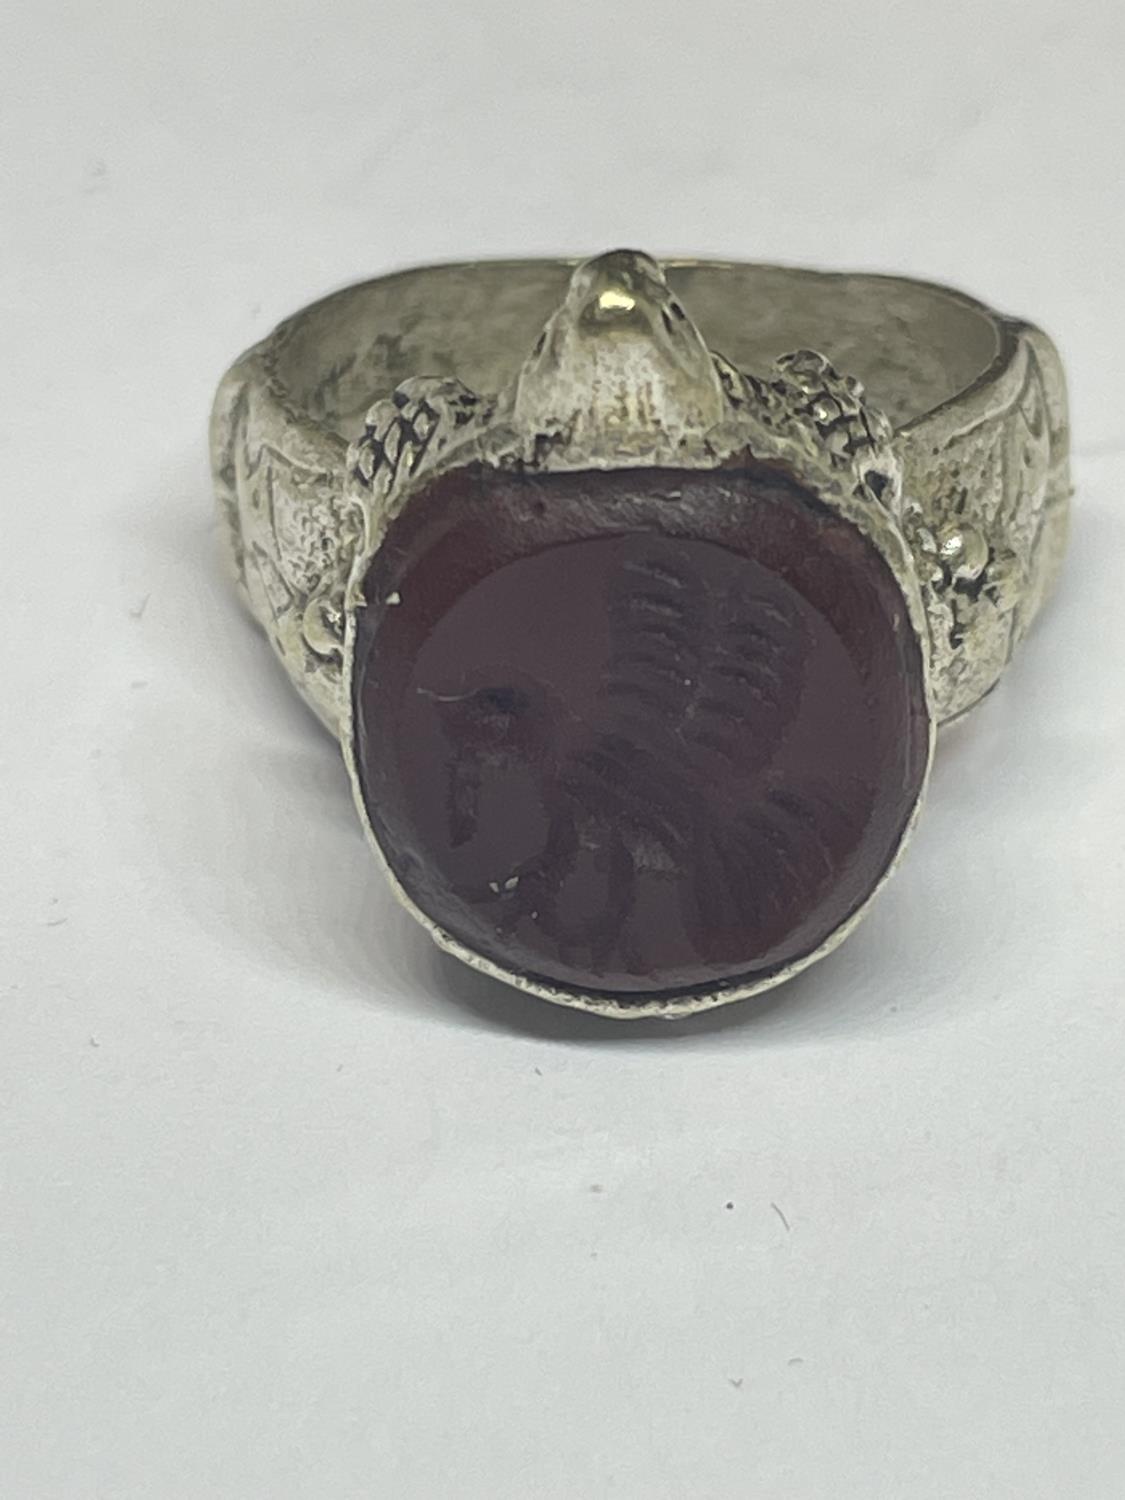 A MARKED SILVER RING WITH A TURTLE DESIGN SEAL INA PRESENTATION BOX